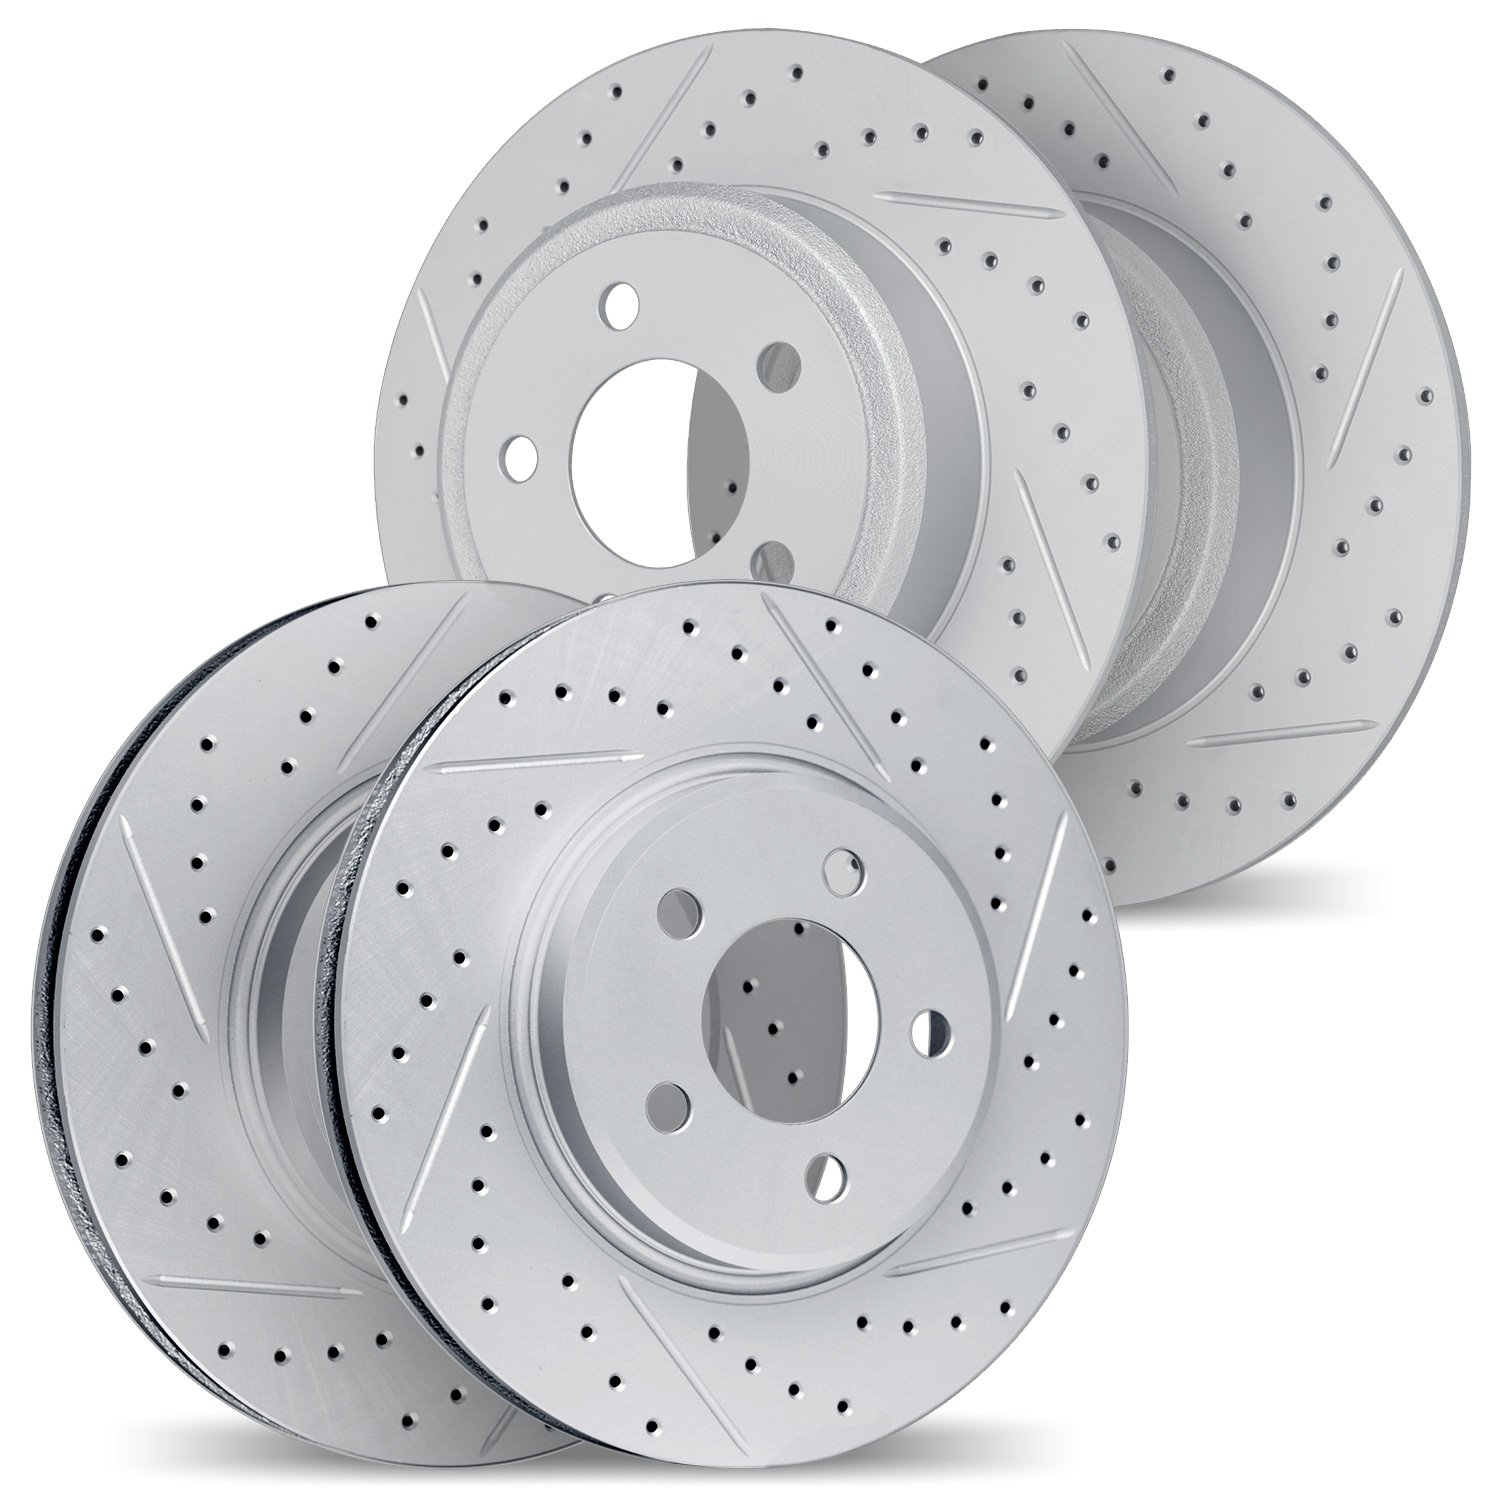 2004-73007 Geoperformance Drilled/Slotted Brake Rotors, 2011-2017 Audi/Volkswagen, Position: Front and Rear